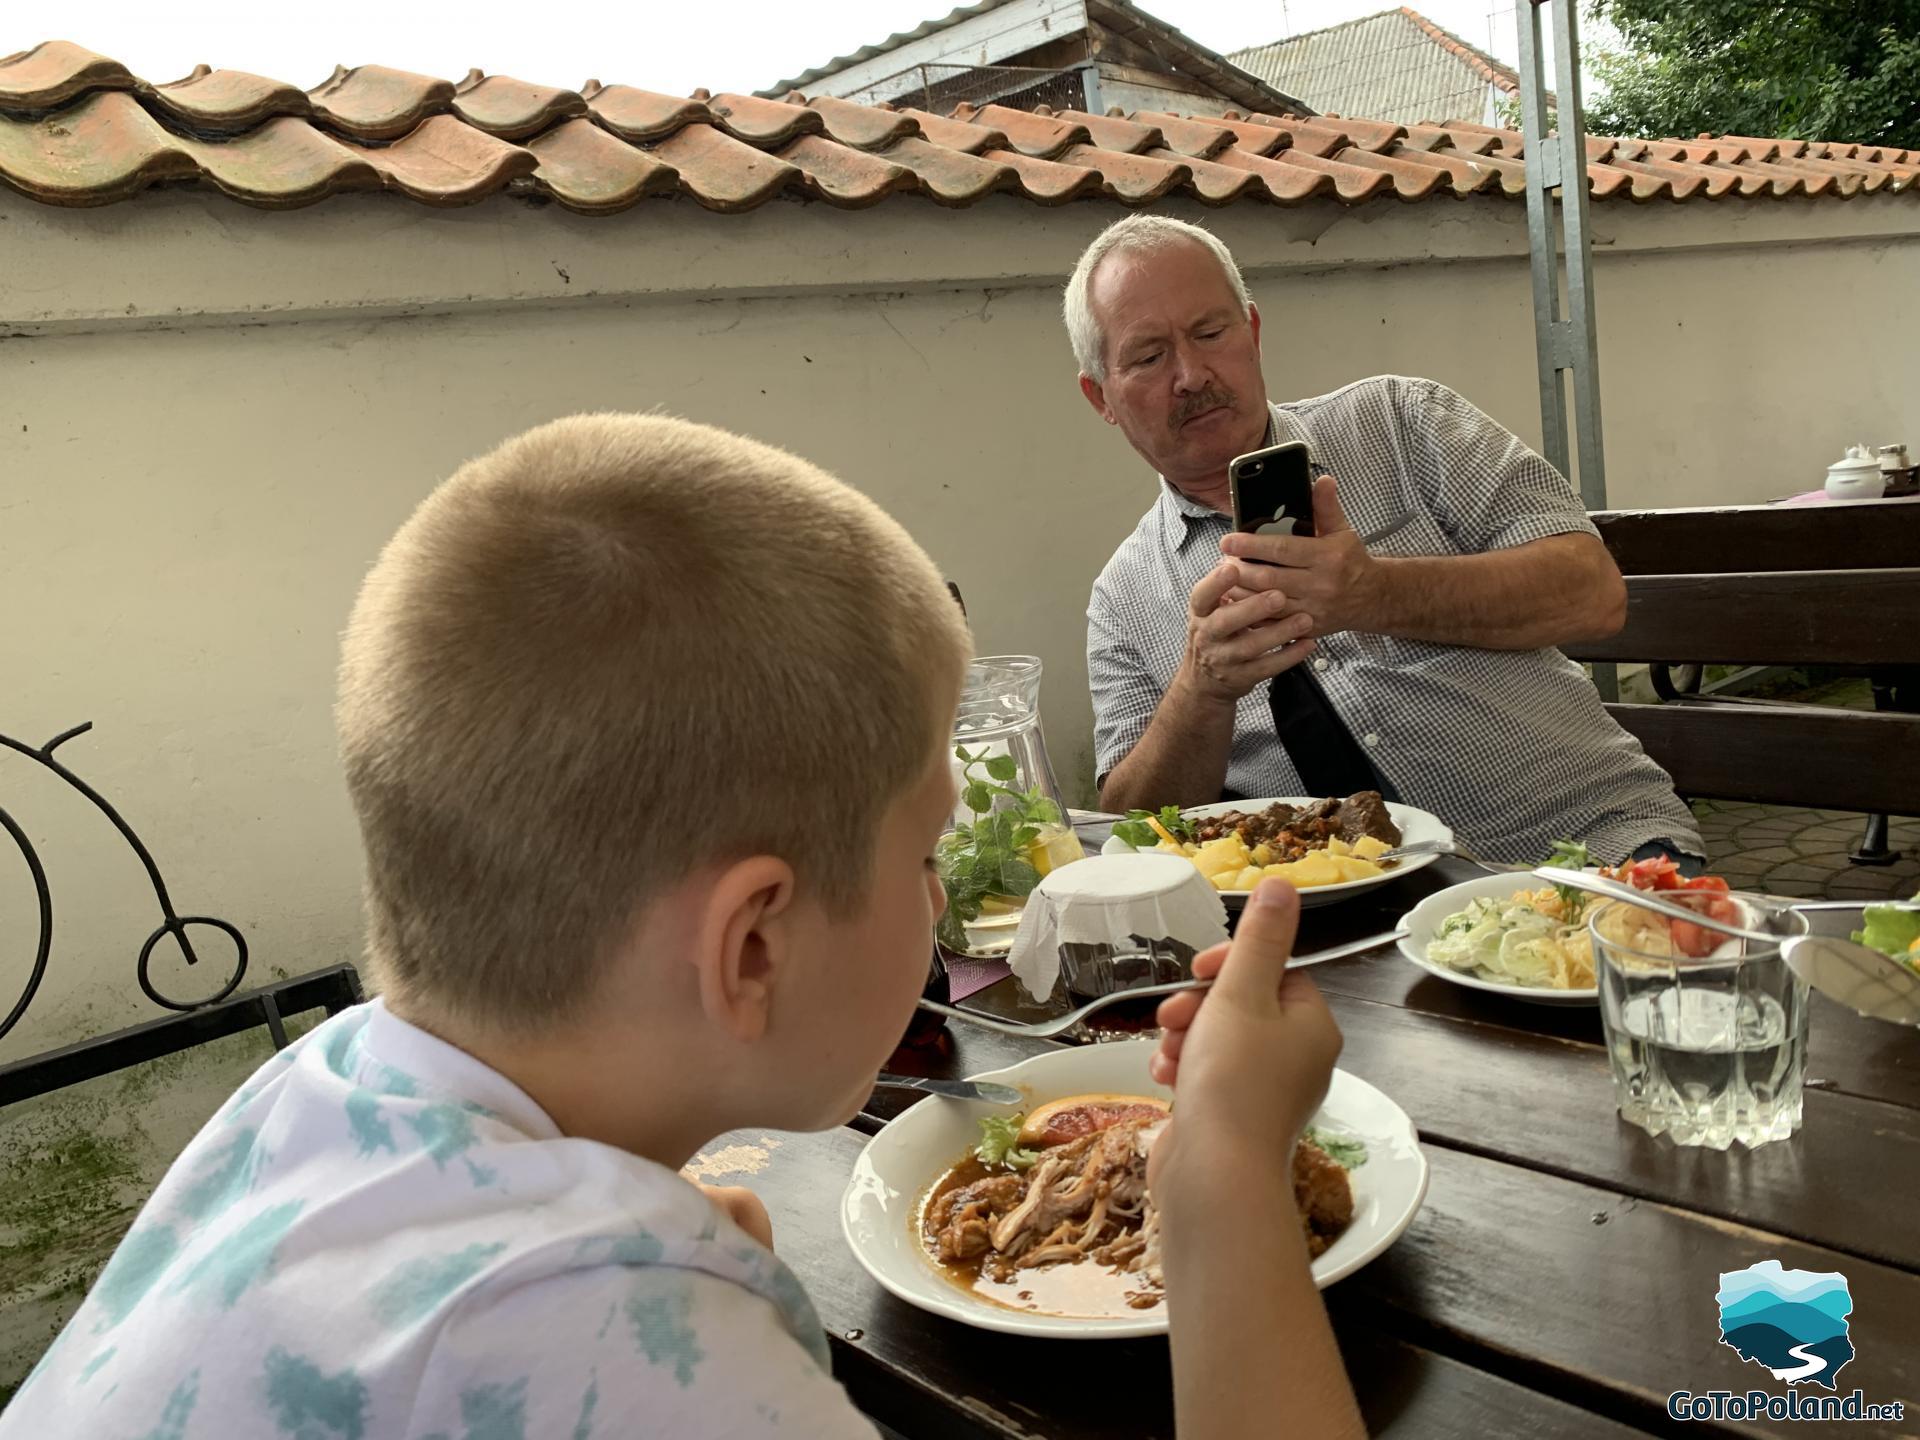 a boy is eating chicken in an outdoor restaurant, a man is taking a photo of the other dishes served on white plates